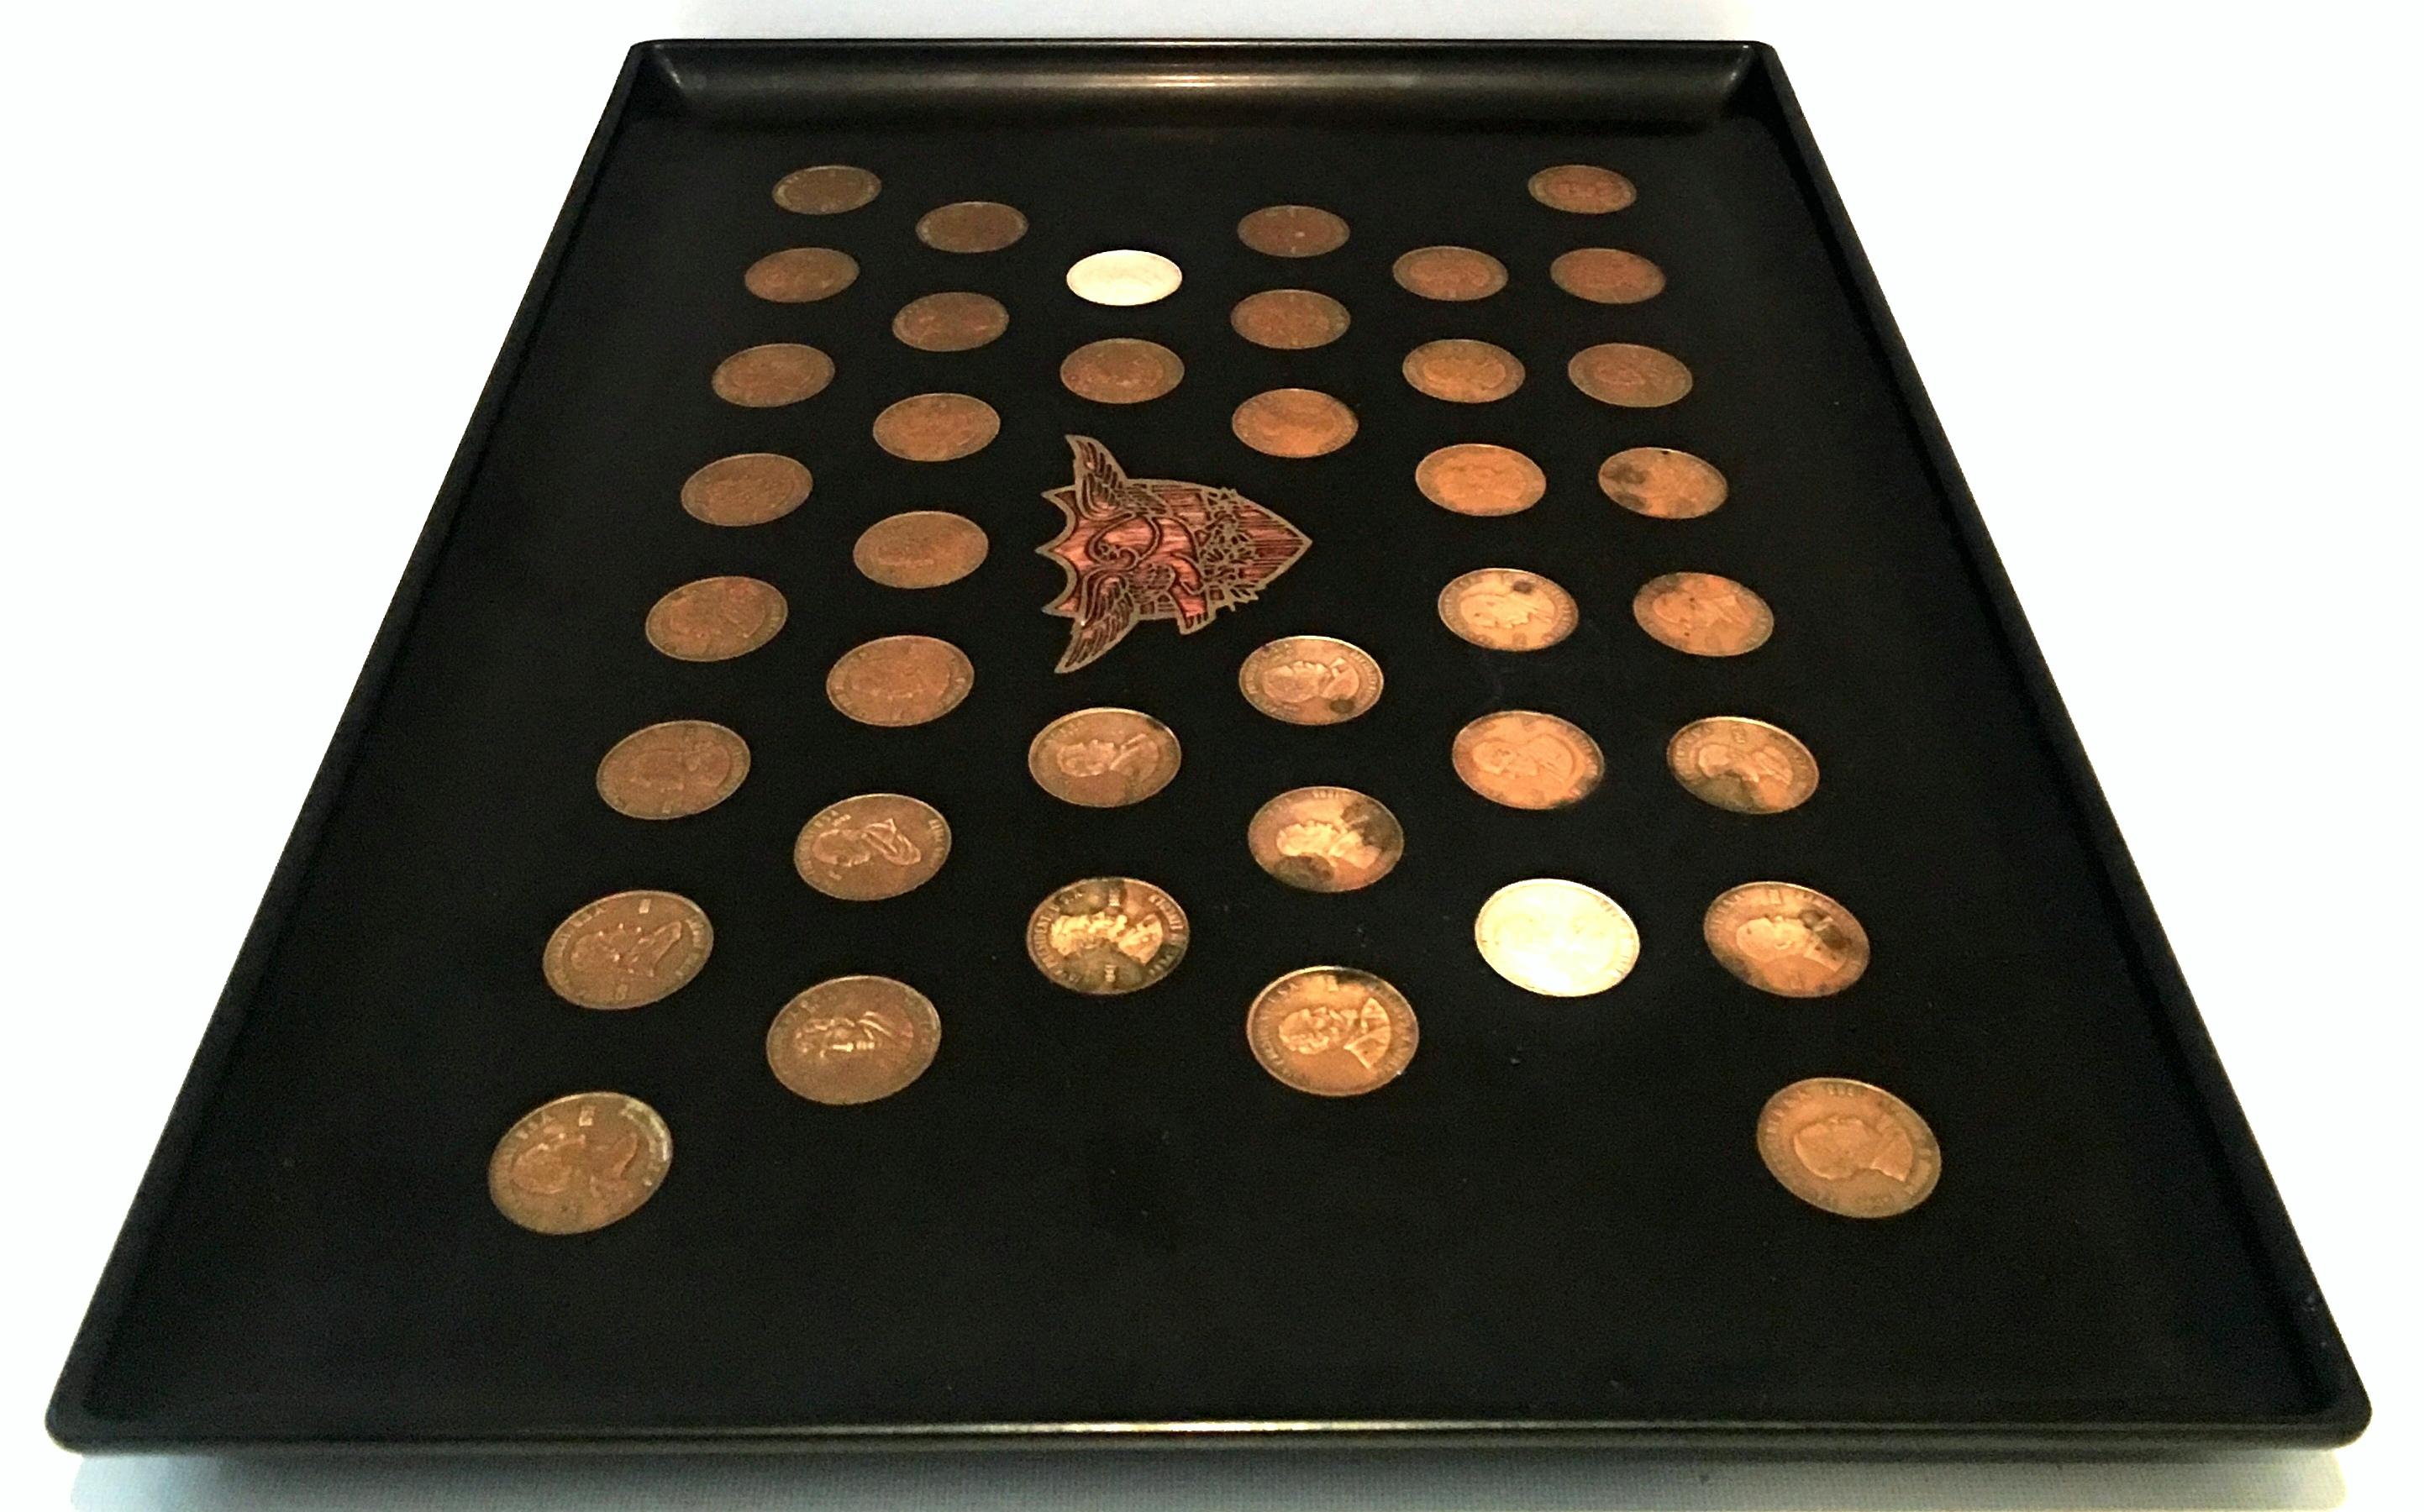 American Mid-20th Century Large Black Lacquer Presidential Coin Inlay Tray by Couroc For Sale